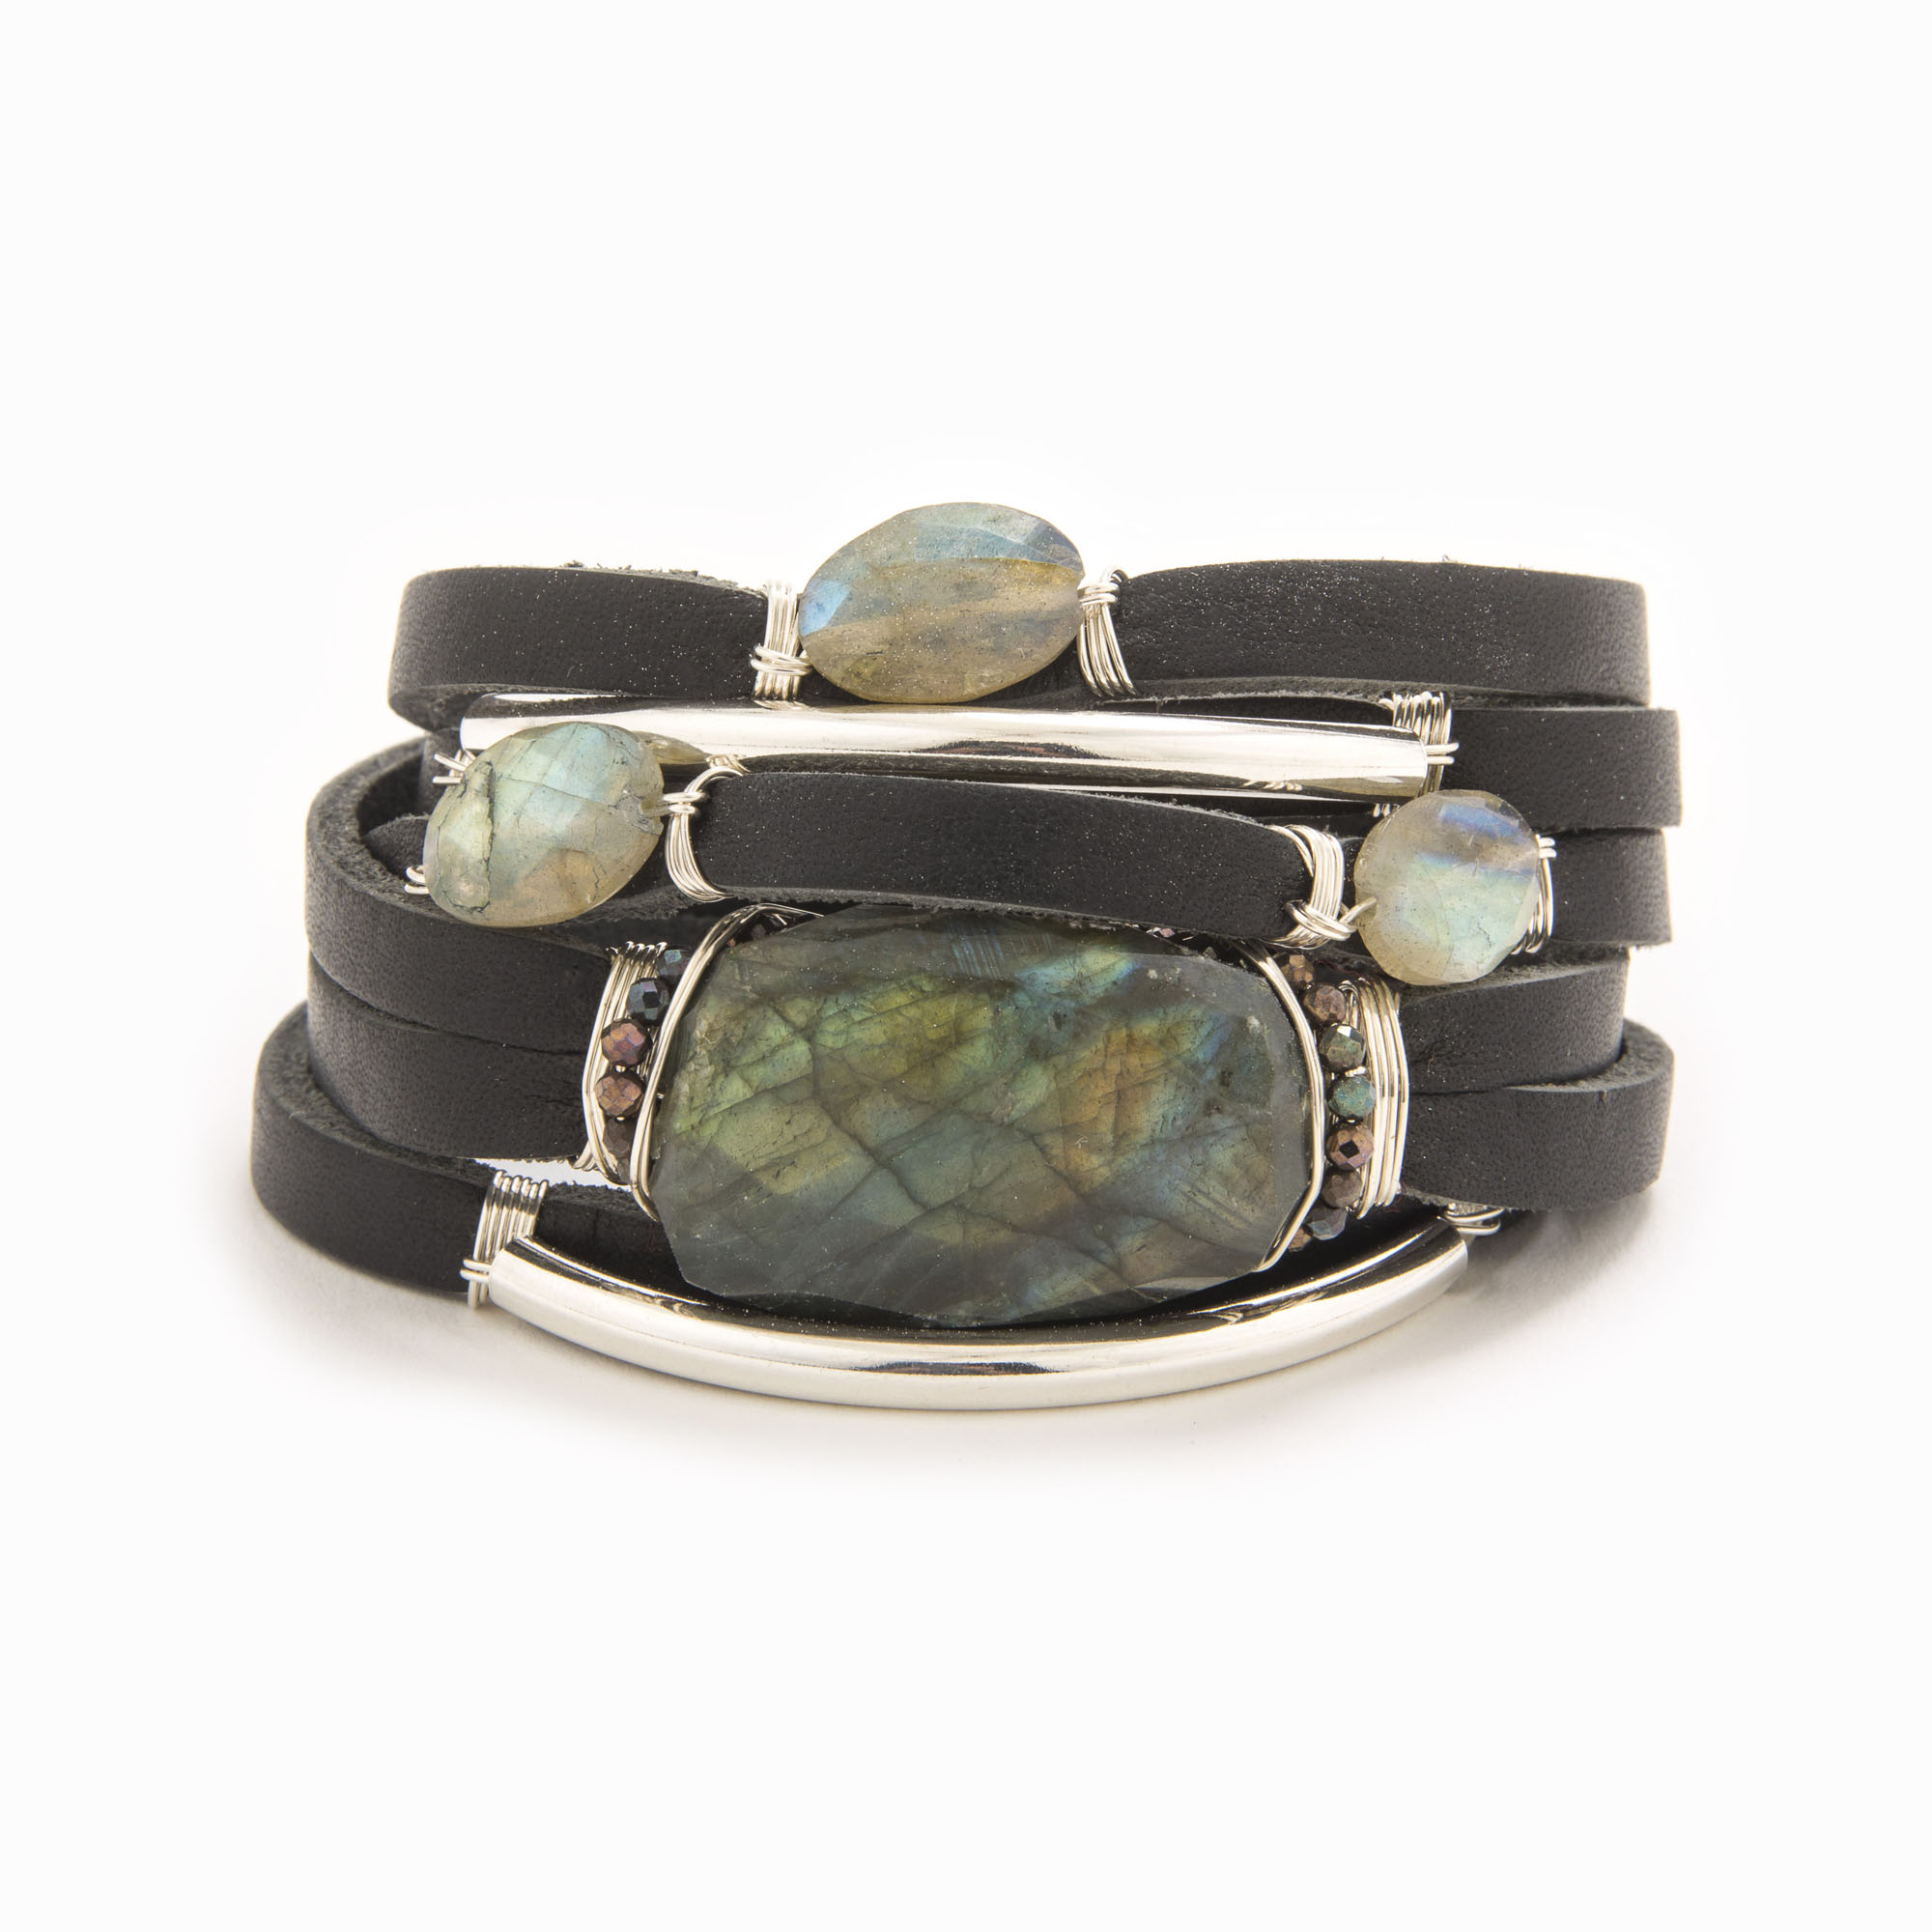 Featured image for “Mona Leather Wrap Bracelet”